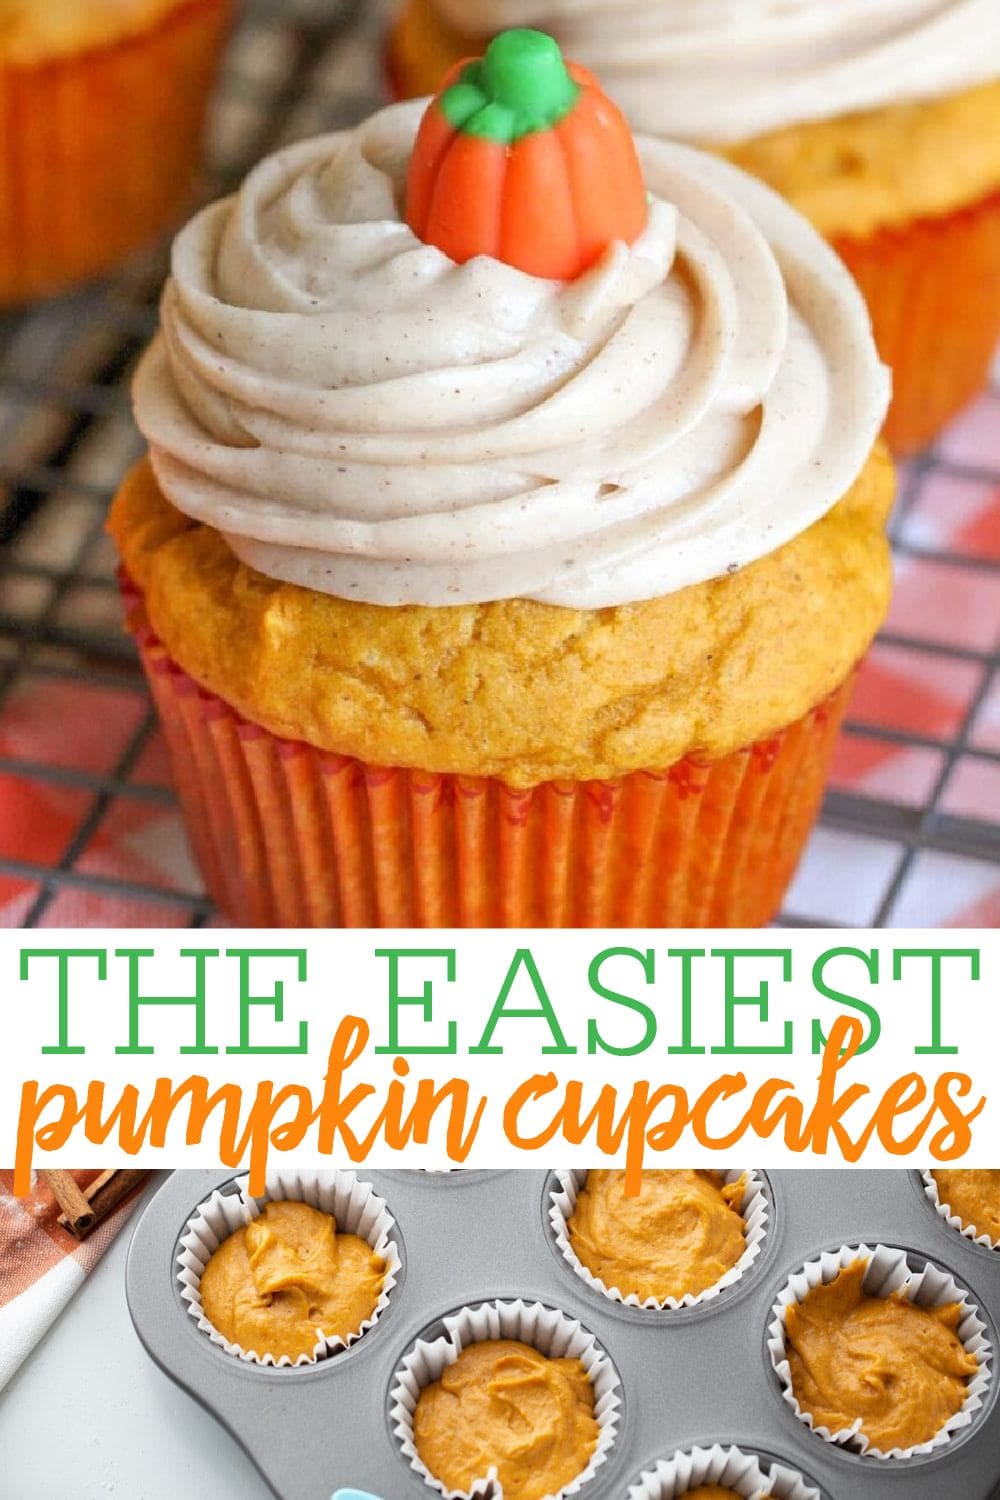 Pumpkin Cupcakes with Cinnamon Cream Cheese Frosting (+VIDEO)